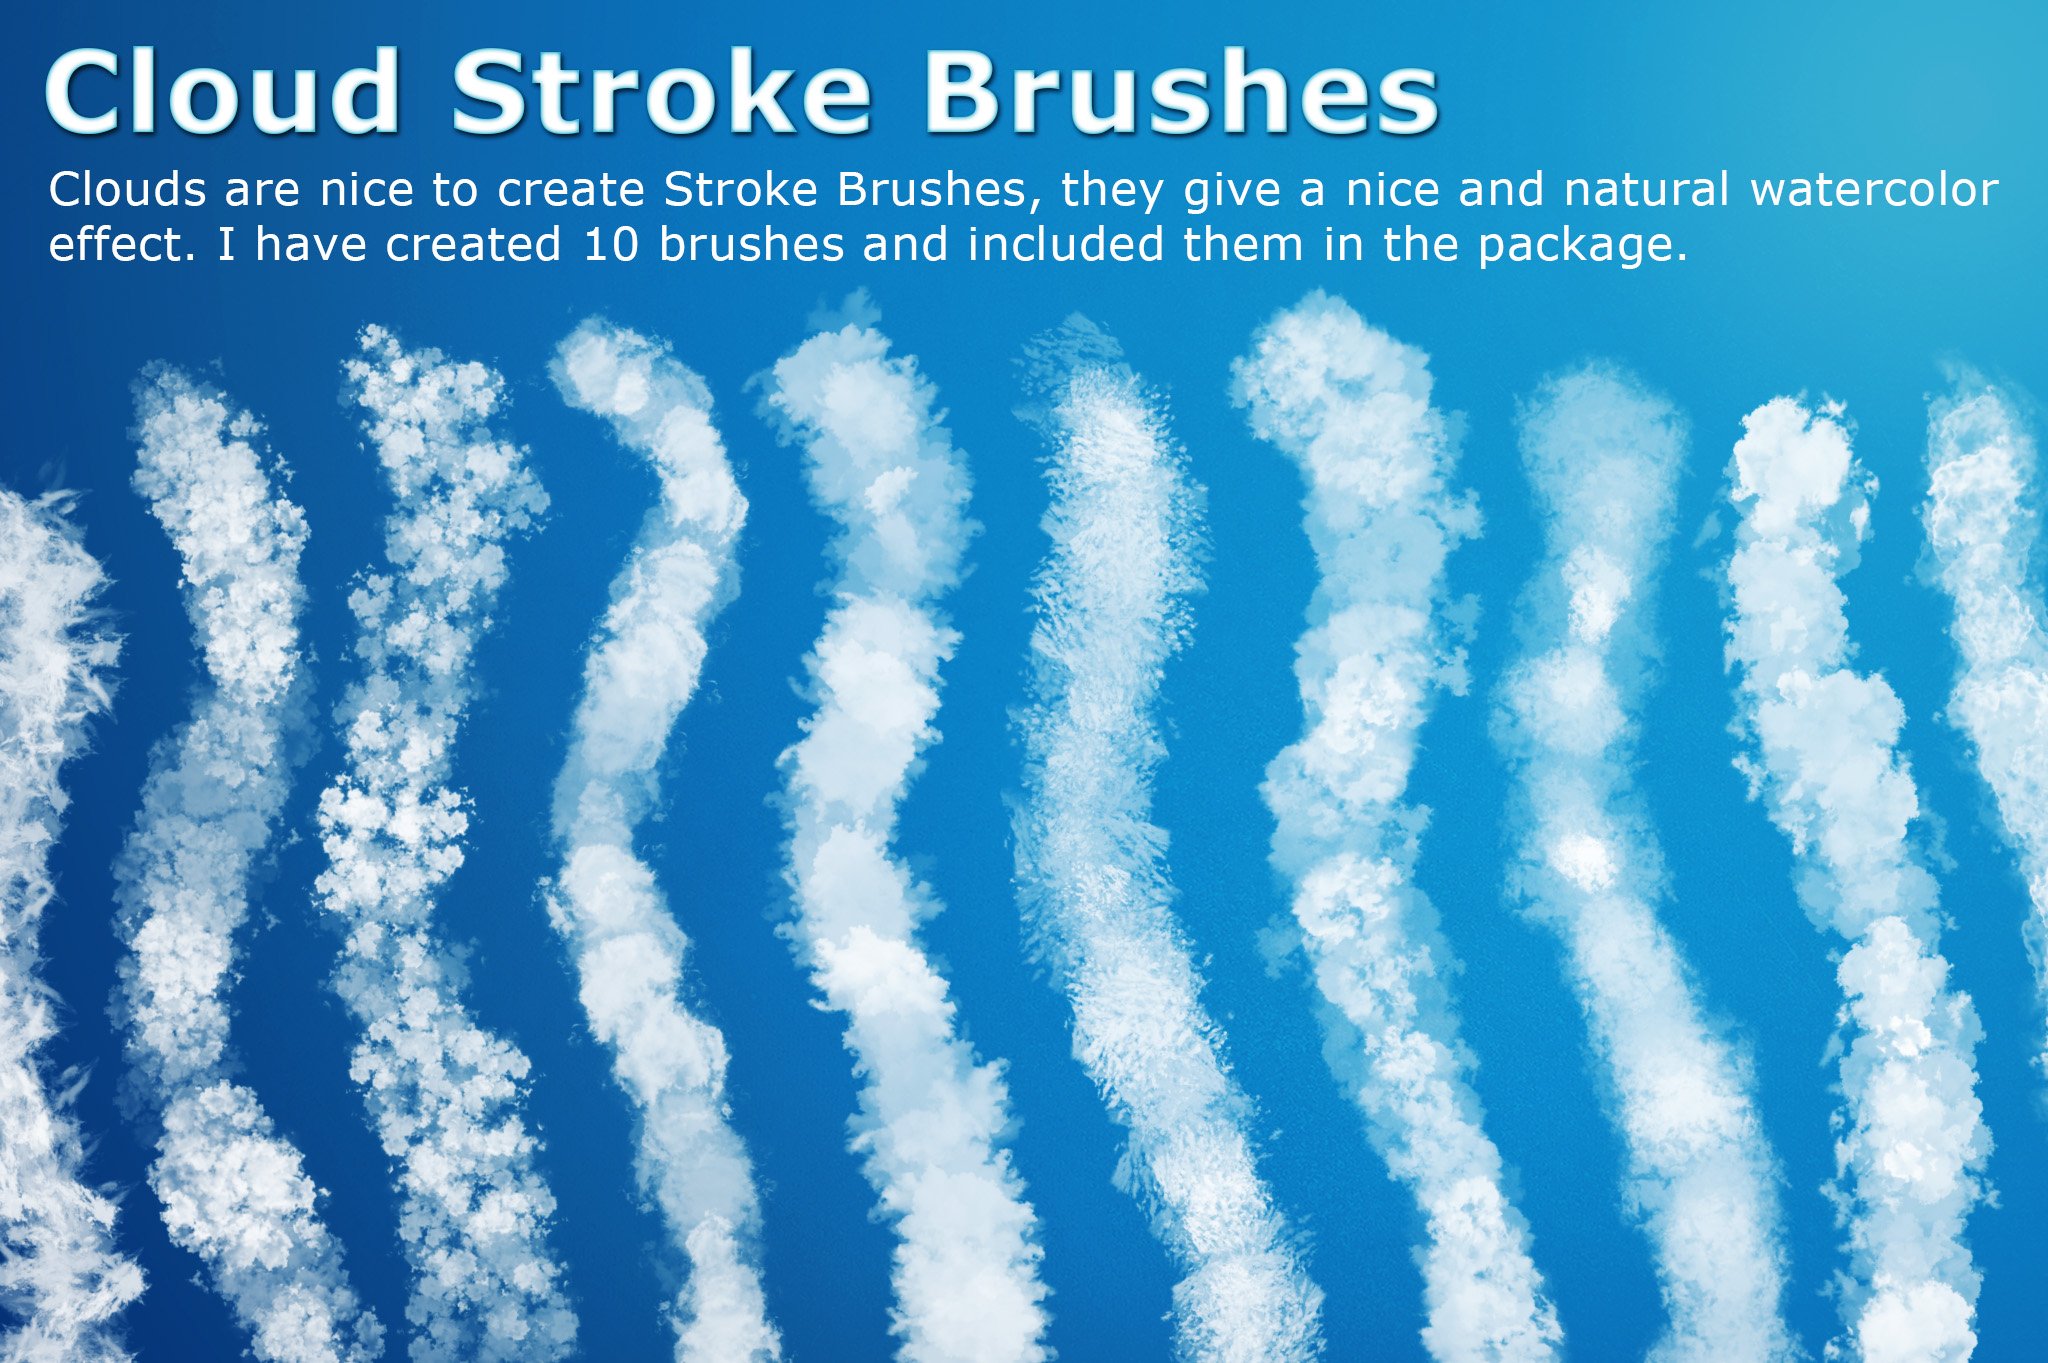 cloudbrushes examples 07 983